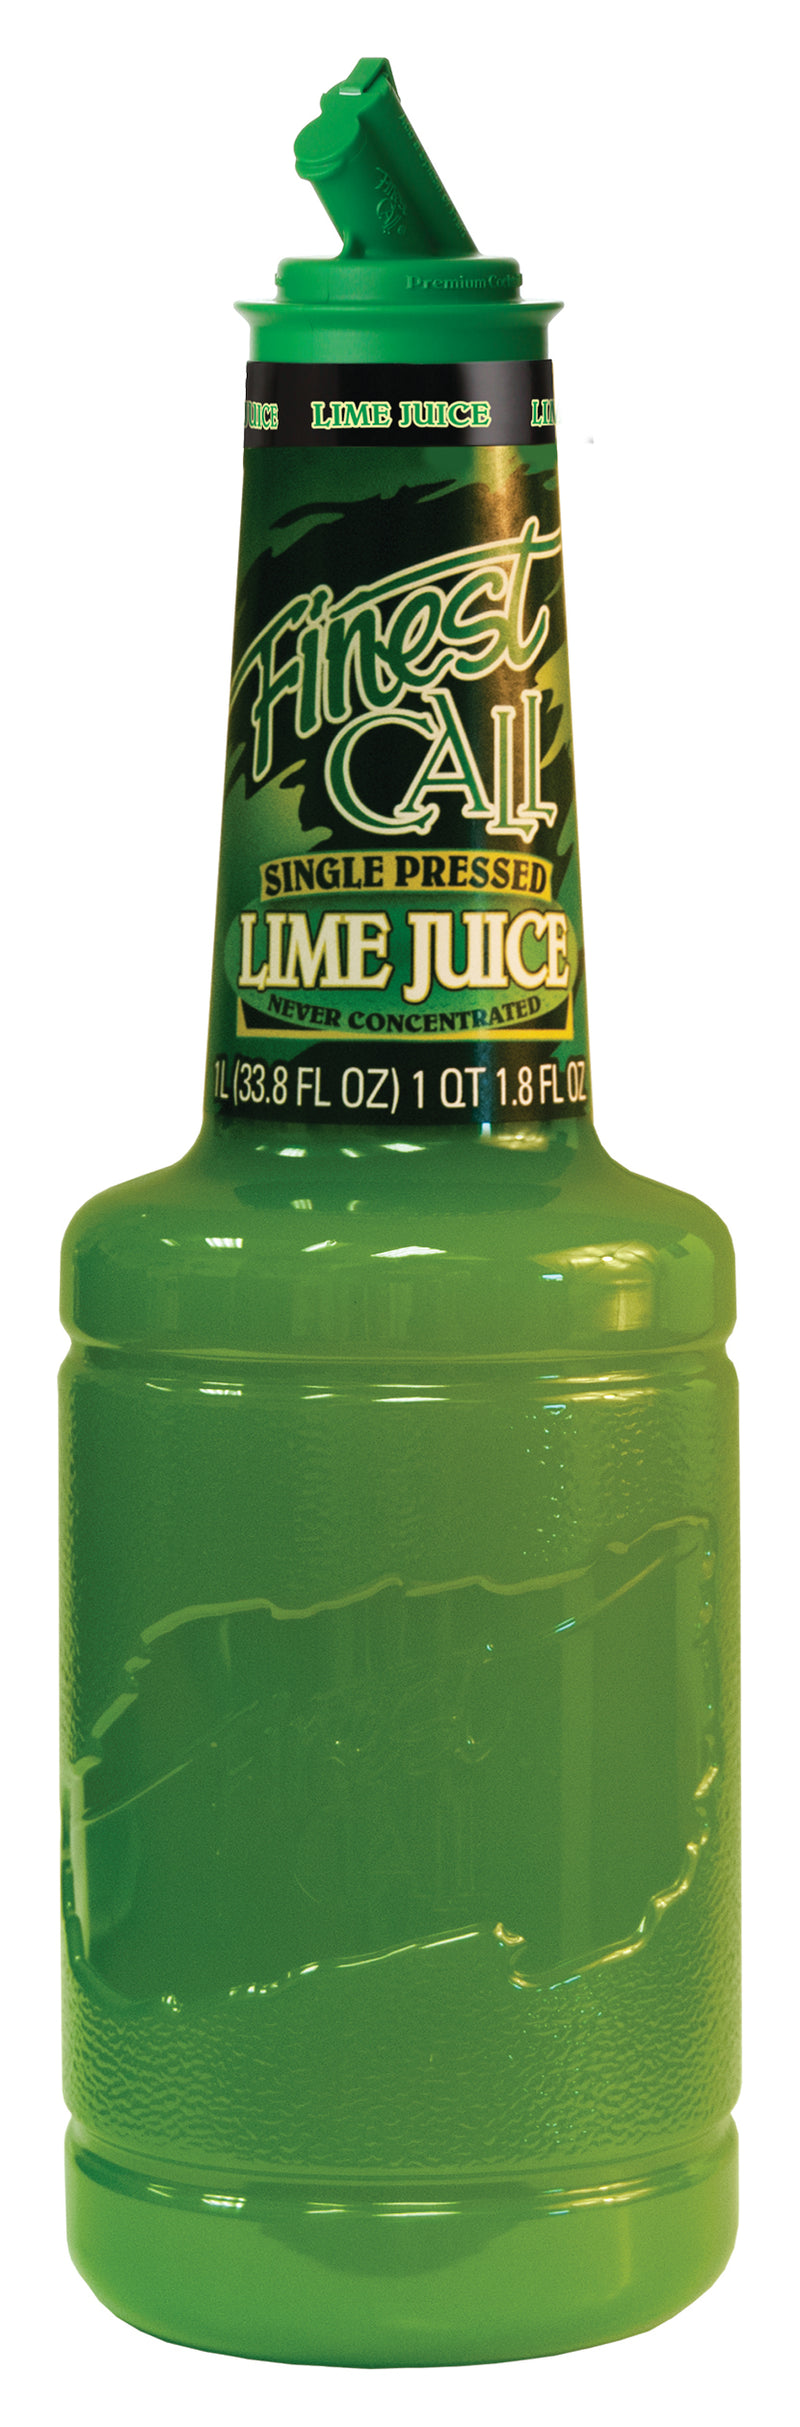 Finest Call Single Pressed Lime Juice 1ltr